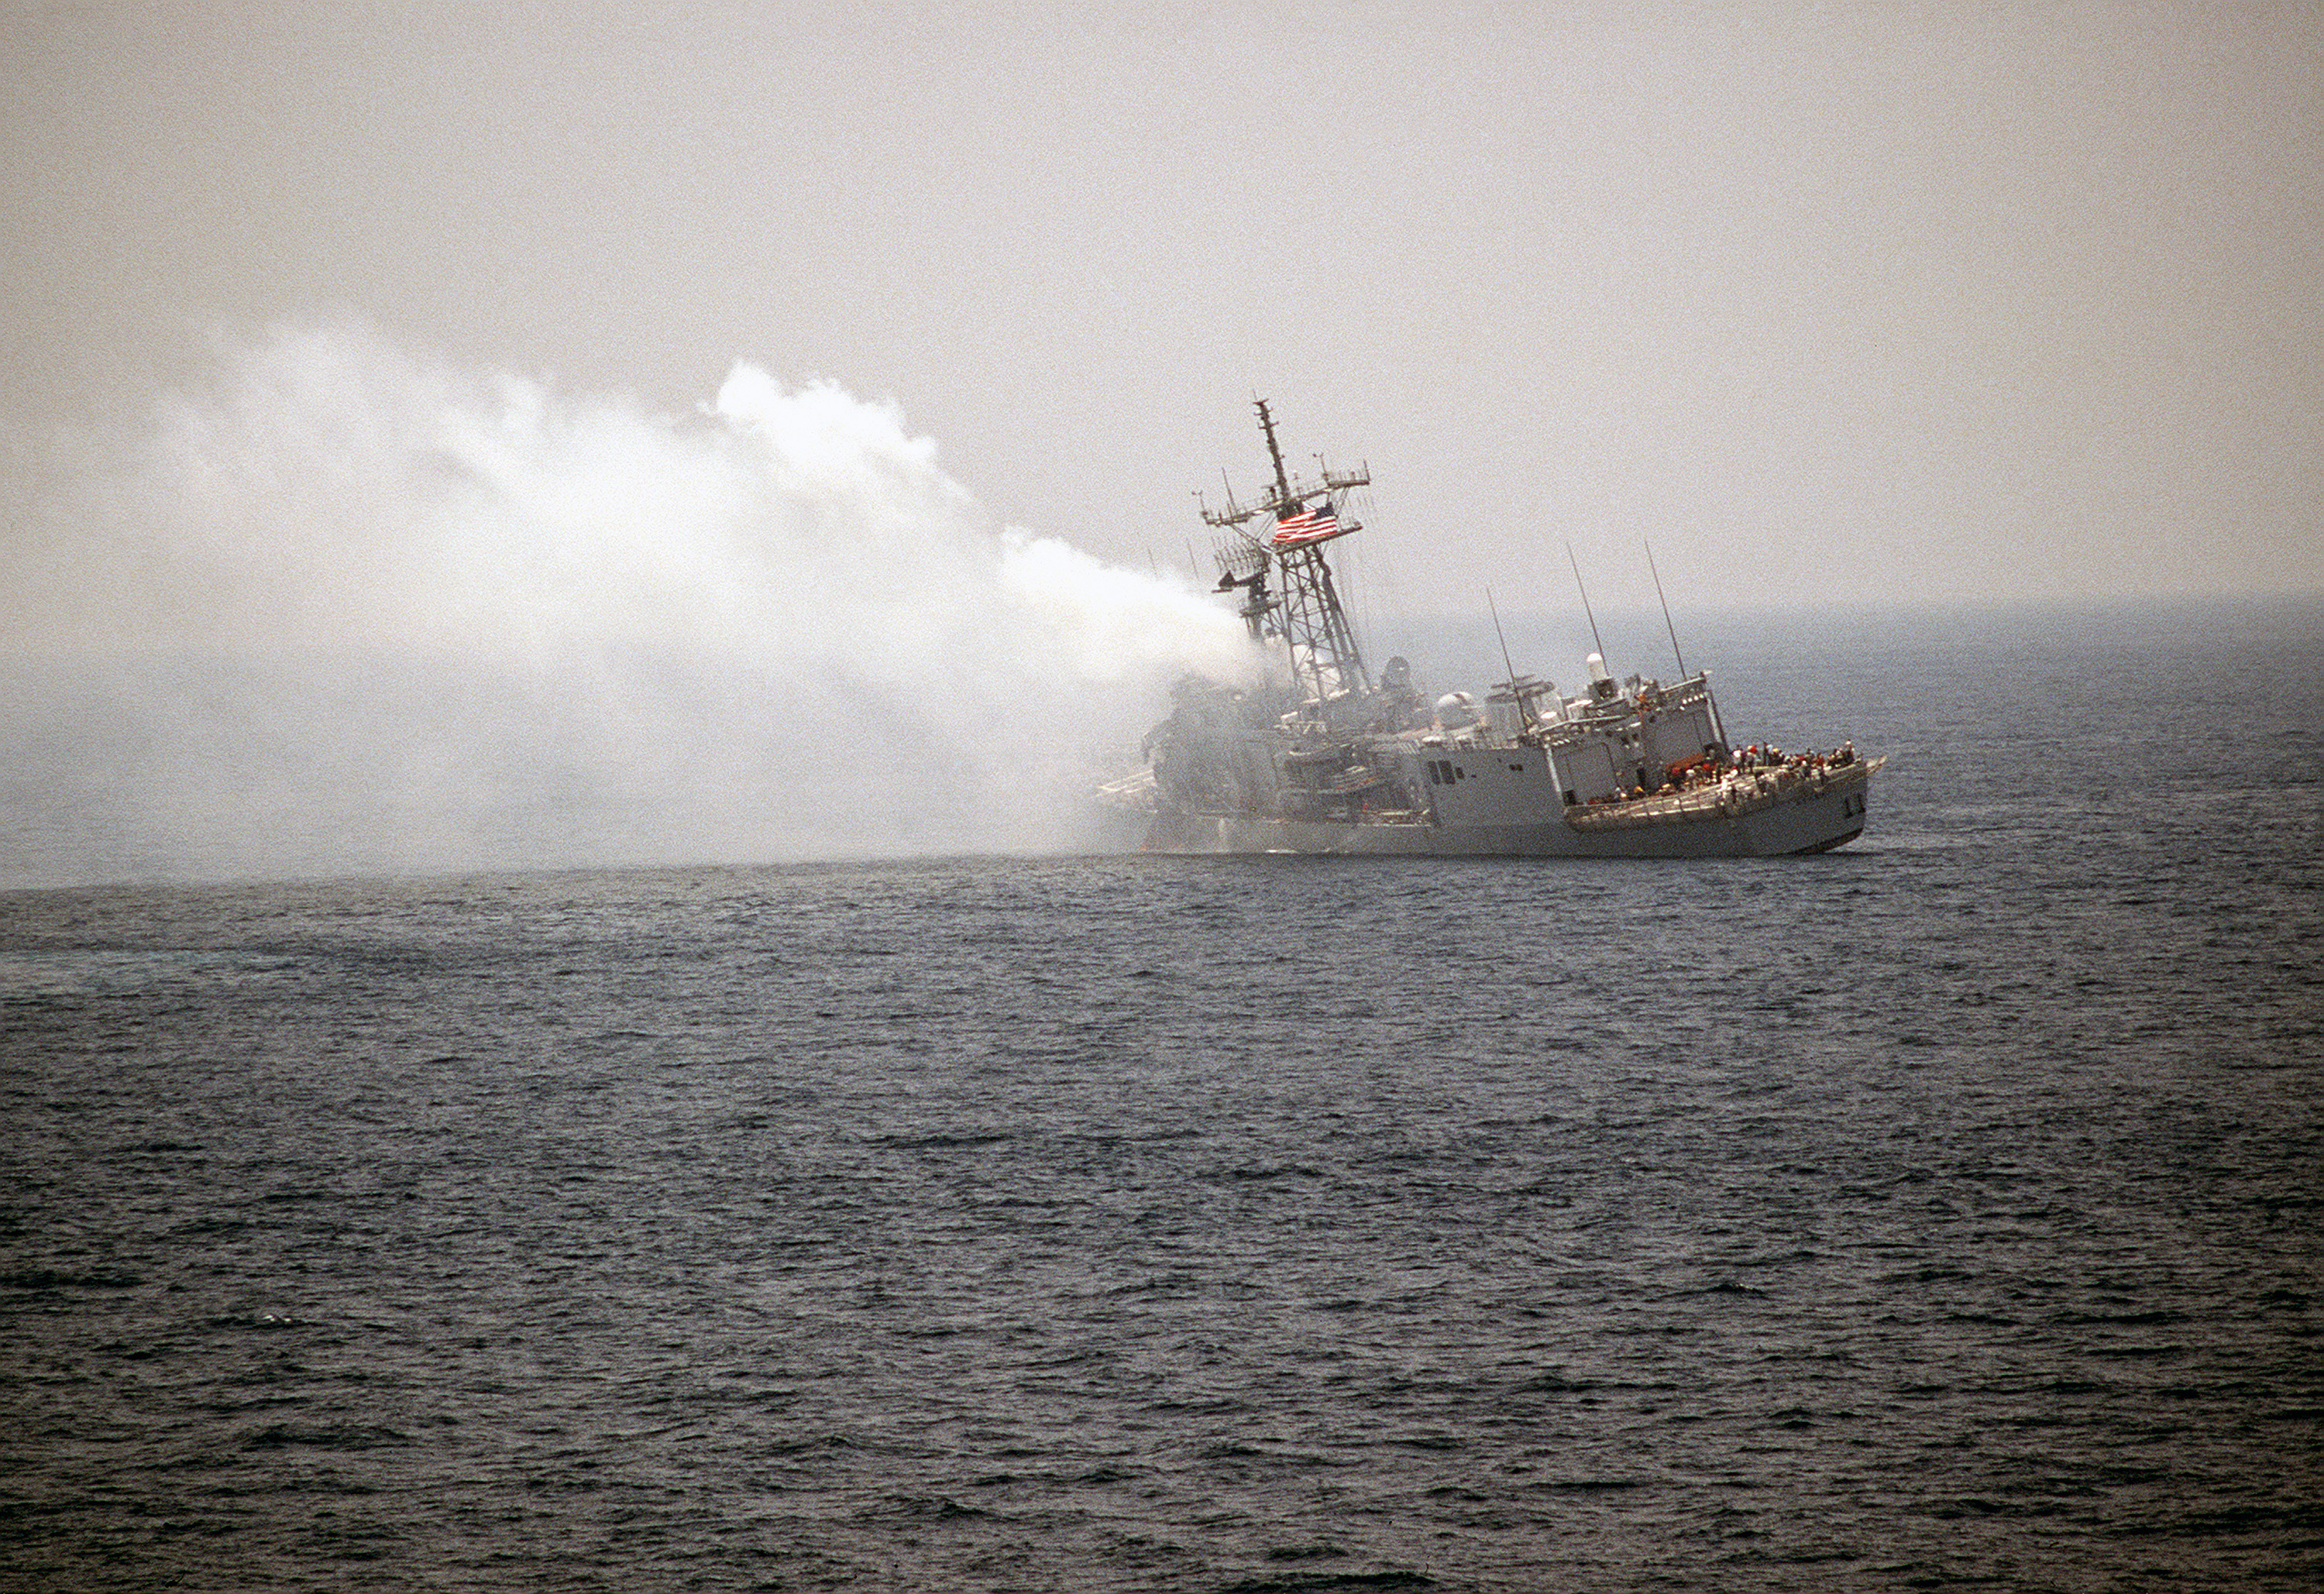 A_port_quarter_view_of_the_guided_missile_frigate_USS_STARK_%28FFG_31%29_listing_to_port_after_being_struck_by_an_Iraqi-launched_Exocet_missile_-_DPLA_-_ea32d9117fb4973359103931e4327595.jpeg